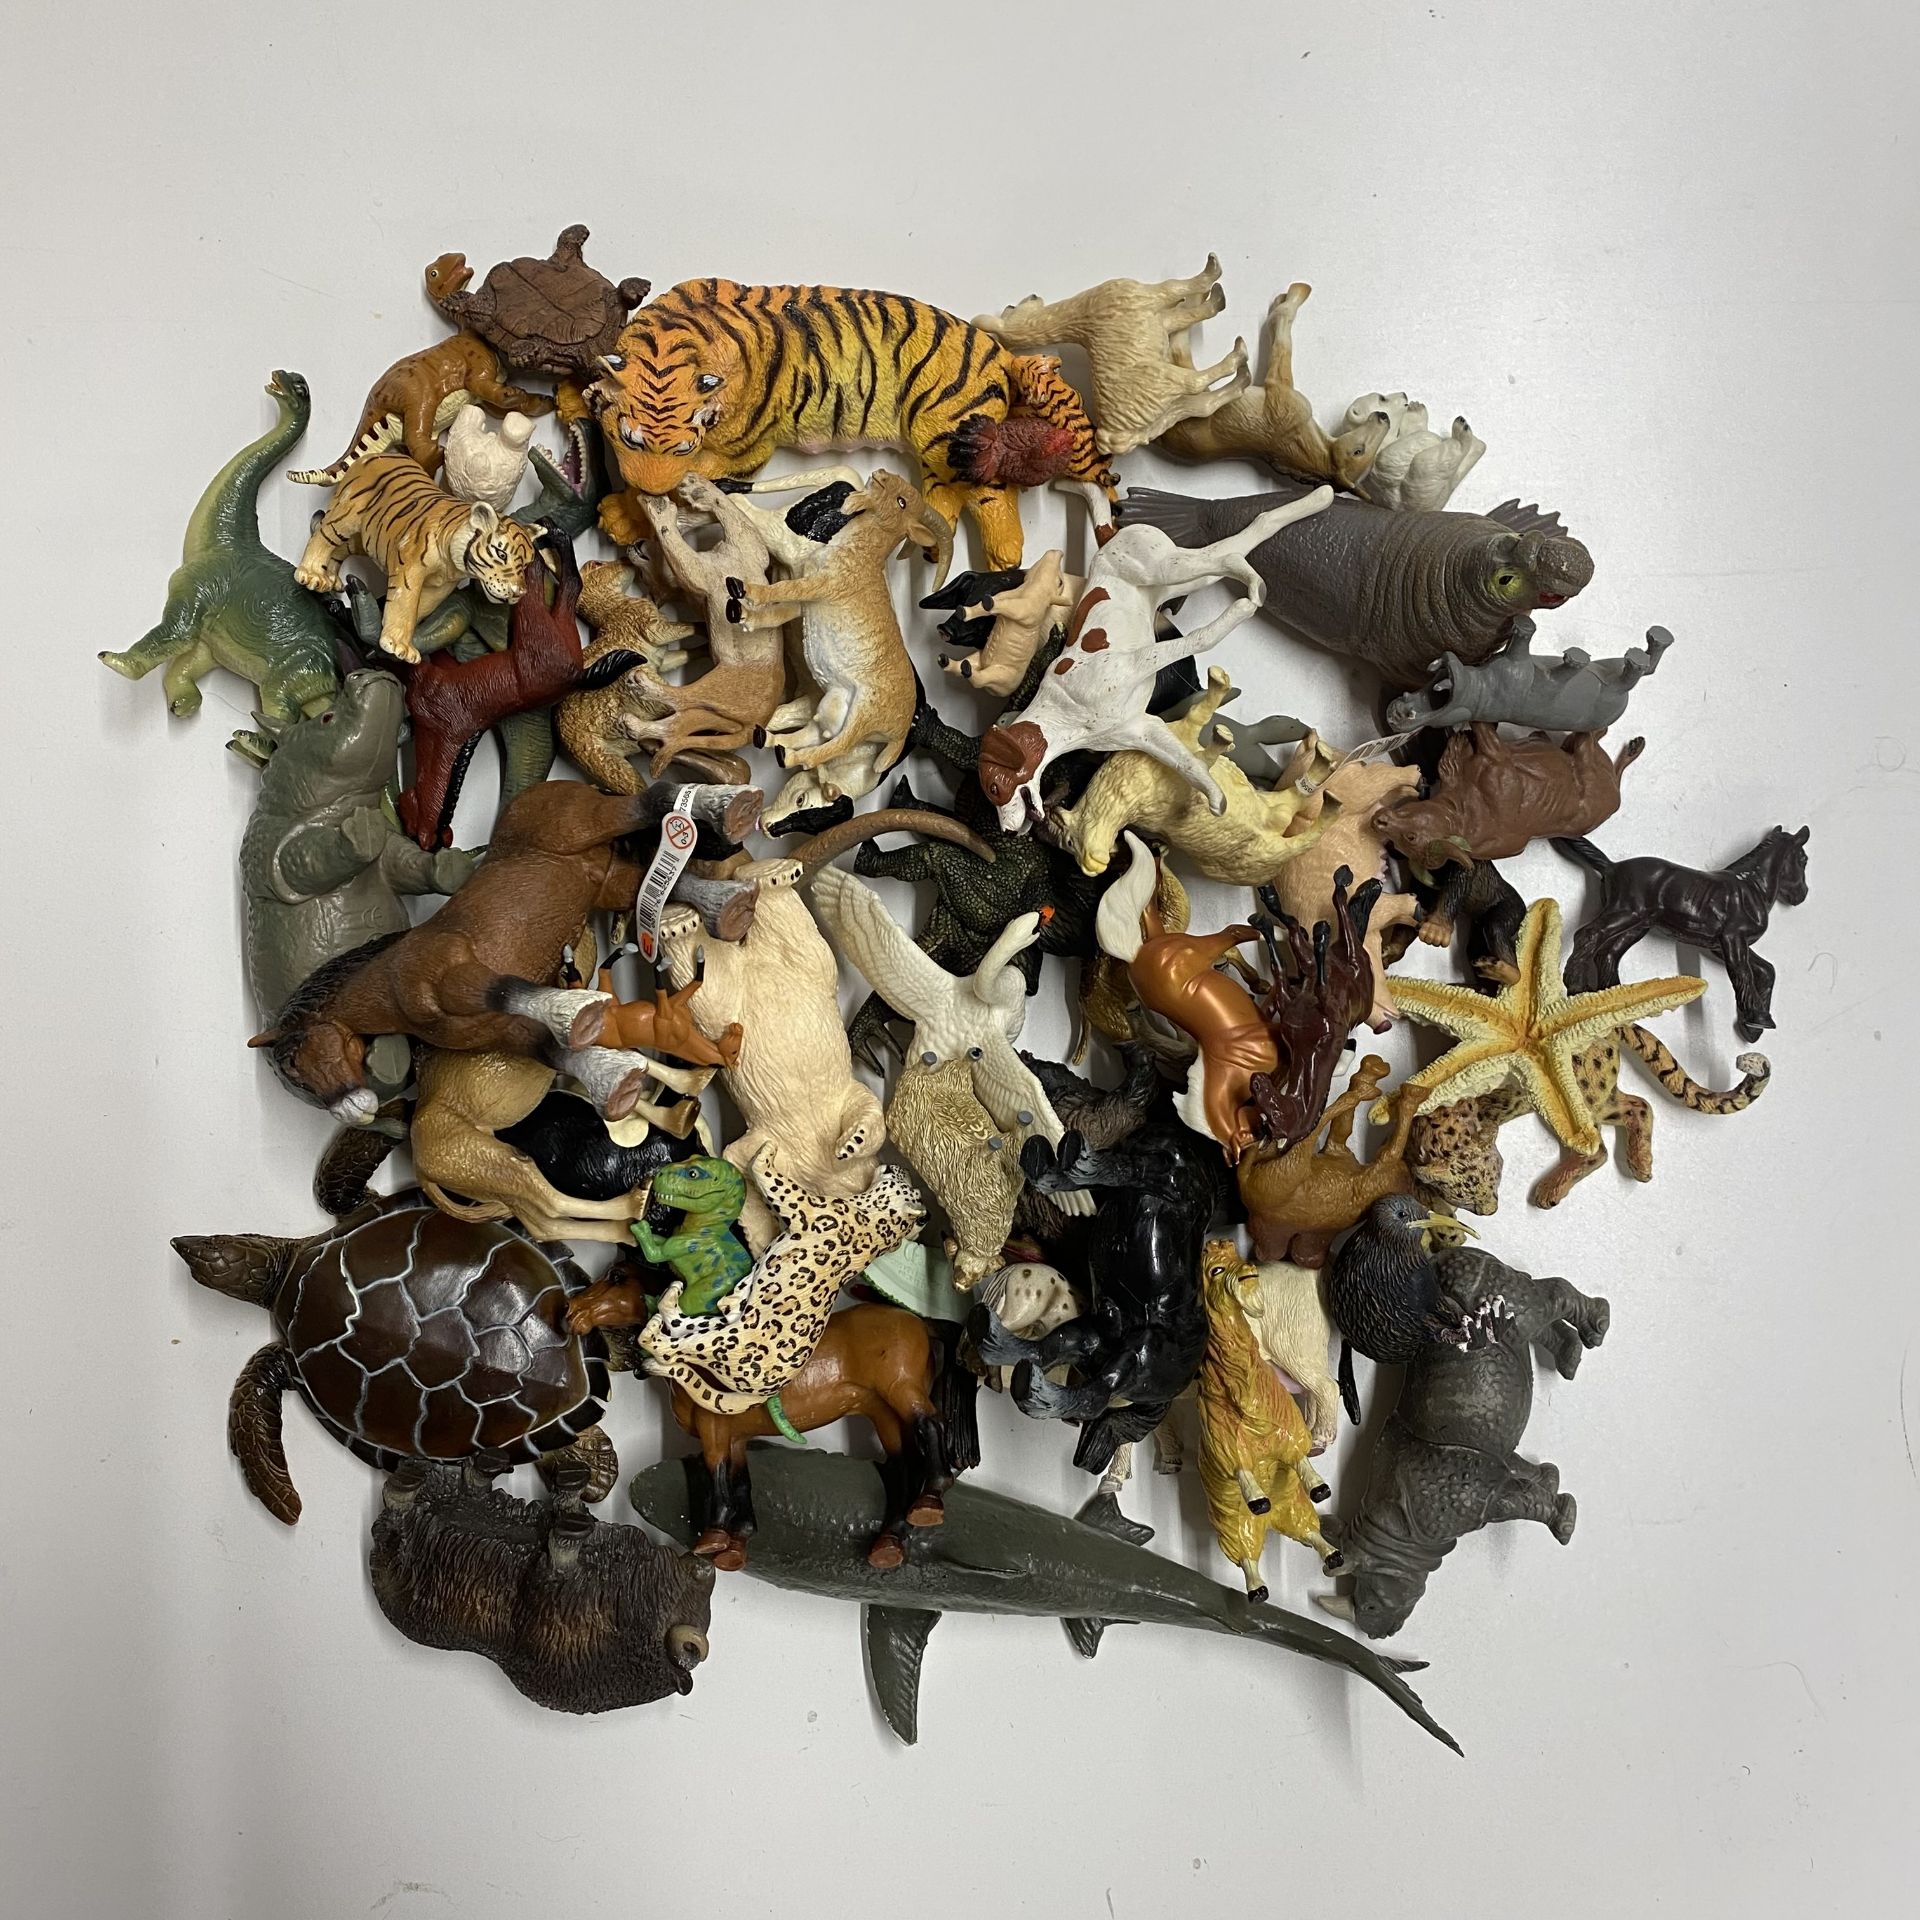 A box containing various animals and dinosaurs including Schleich and others.